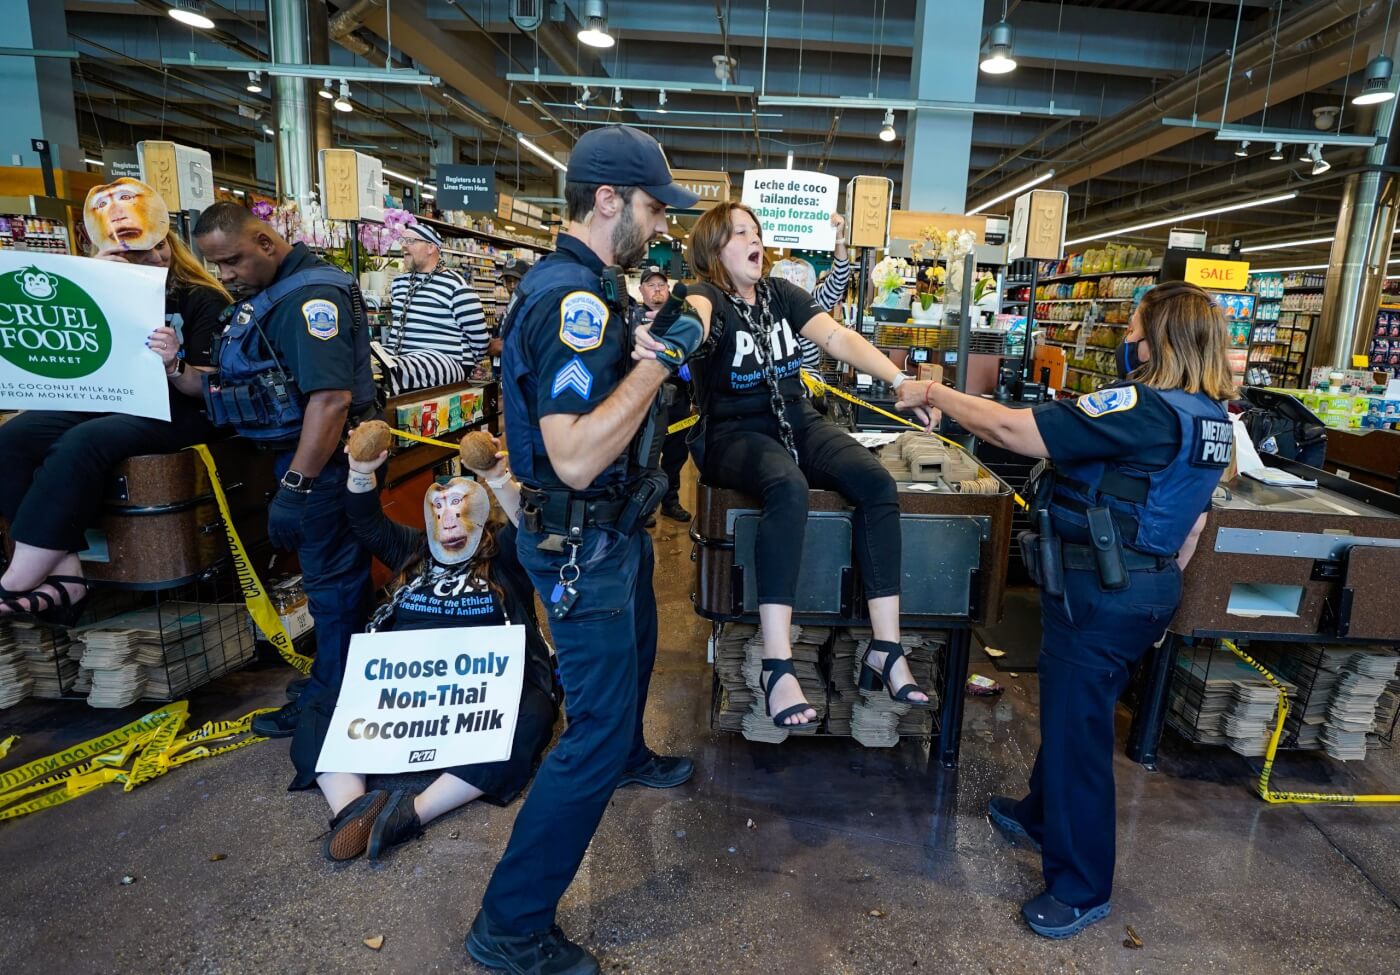 protesters blockading the checkout lanes at whole foods, with monkey masks and signs reading "cruel foods" and "choose only non thai coconut milk". other protestors appear in mock prison jumpsuits. police officers are grabbing protestors.